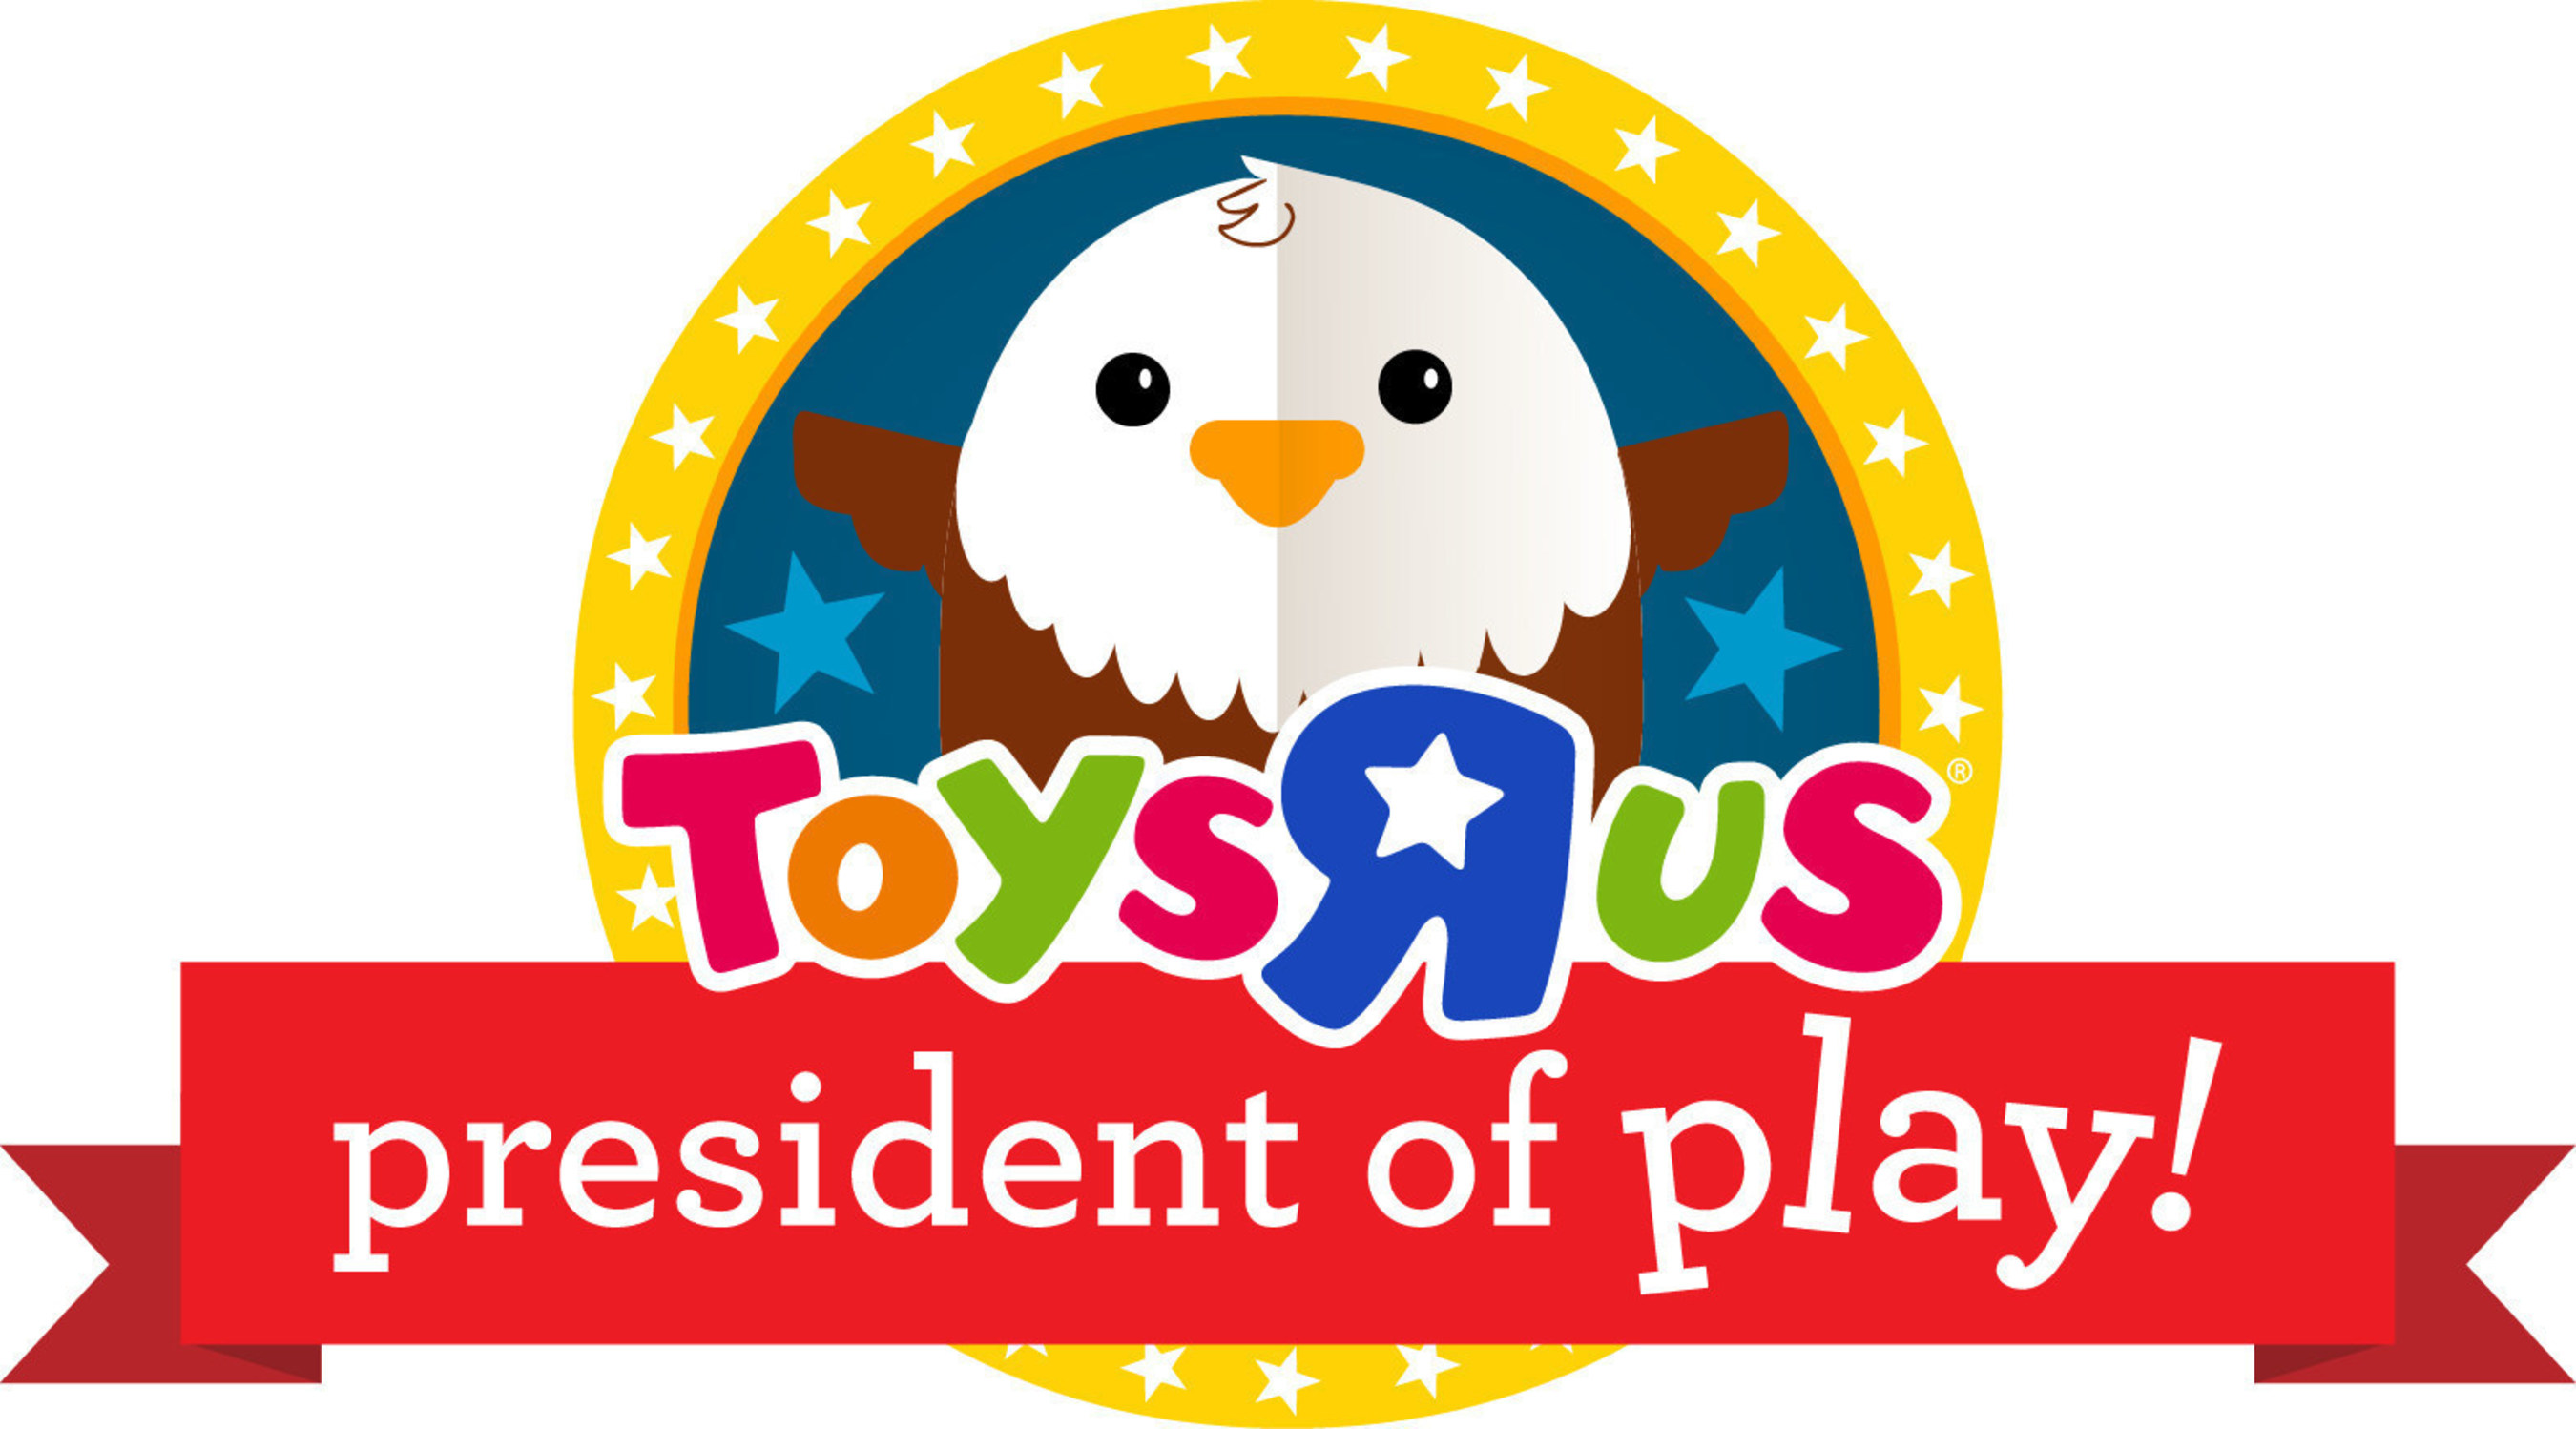 Toys"R"Us Names its first-ever President of Play - Ariana Gentry (age 10) from Swansea, IL